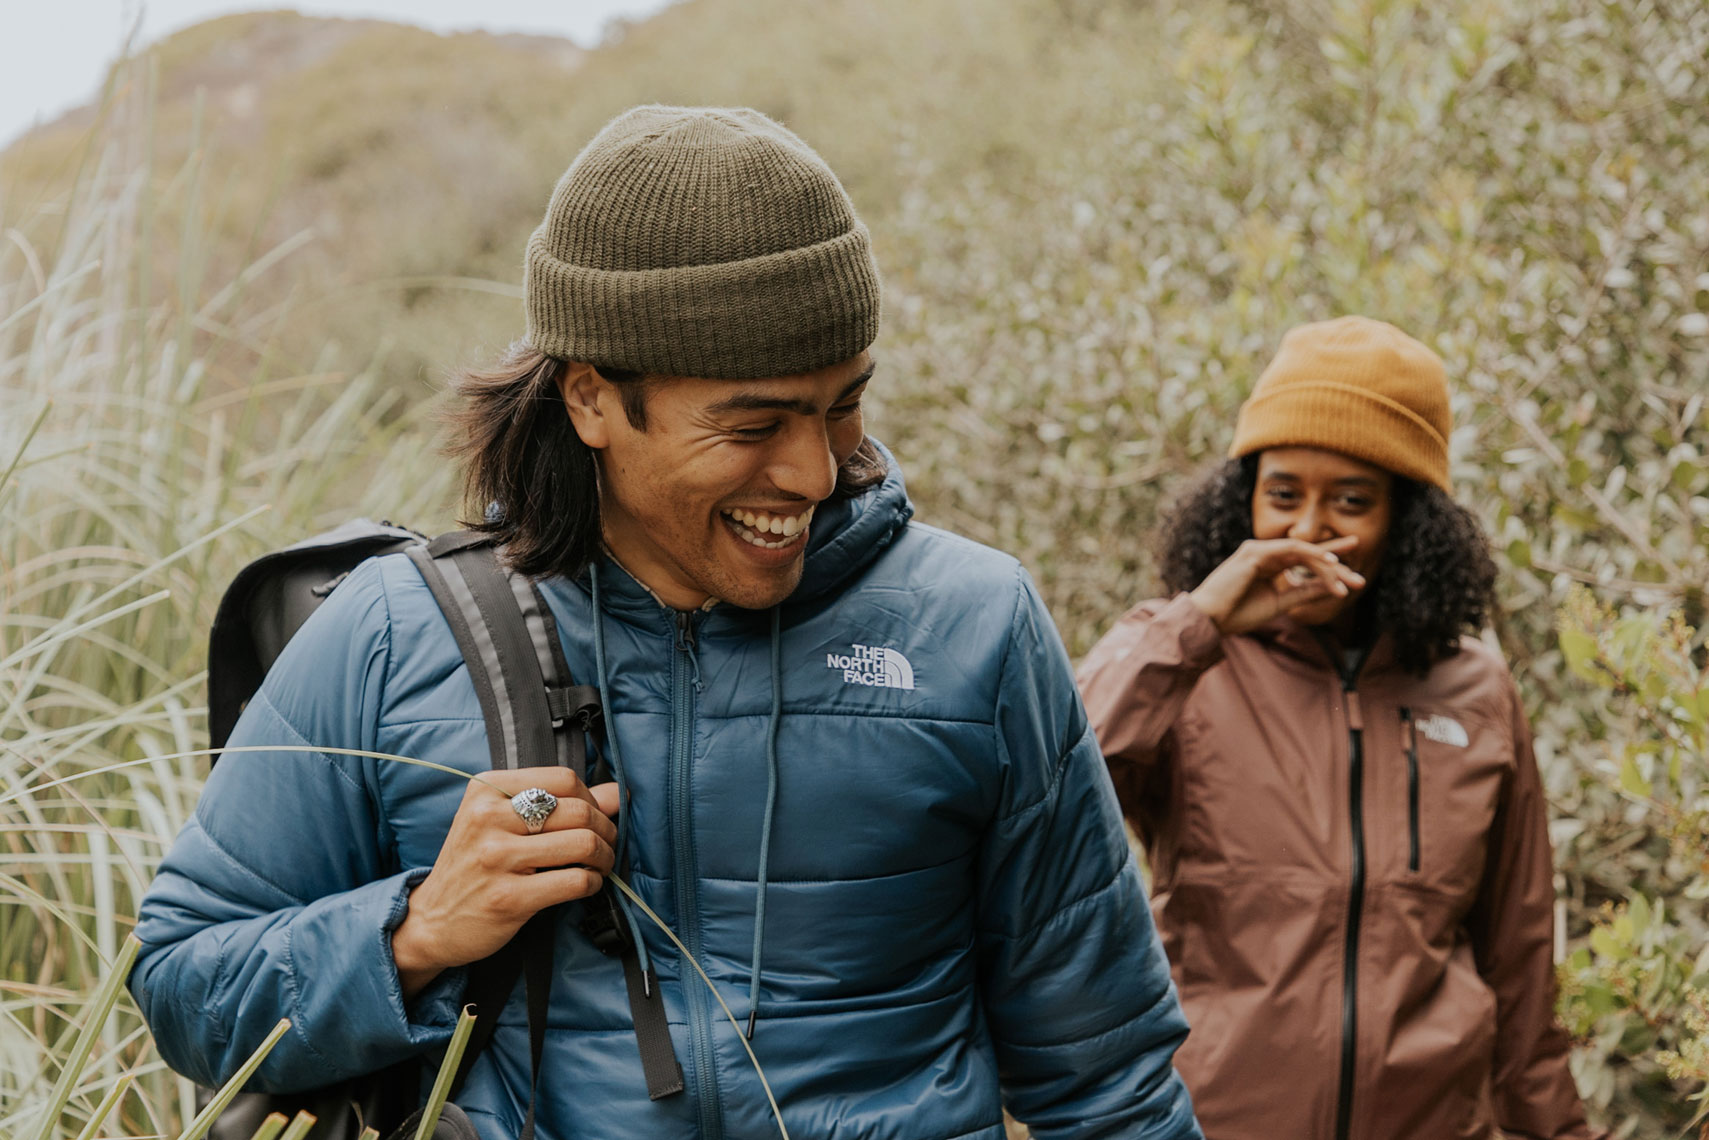 Jordan and Dani-lifestyle travel photographer and director duo-cheerful couple hiking 